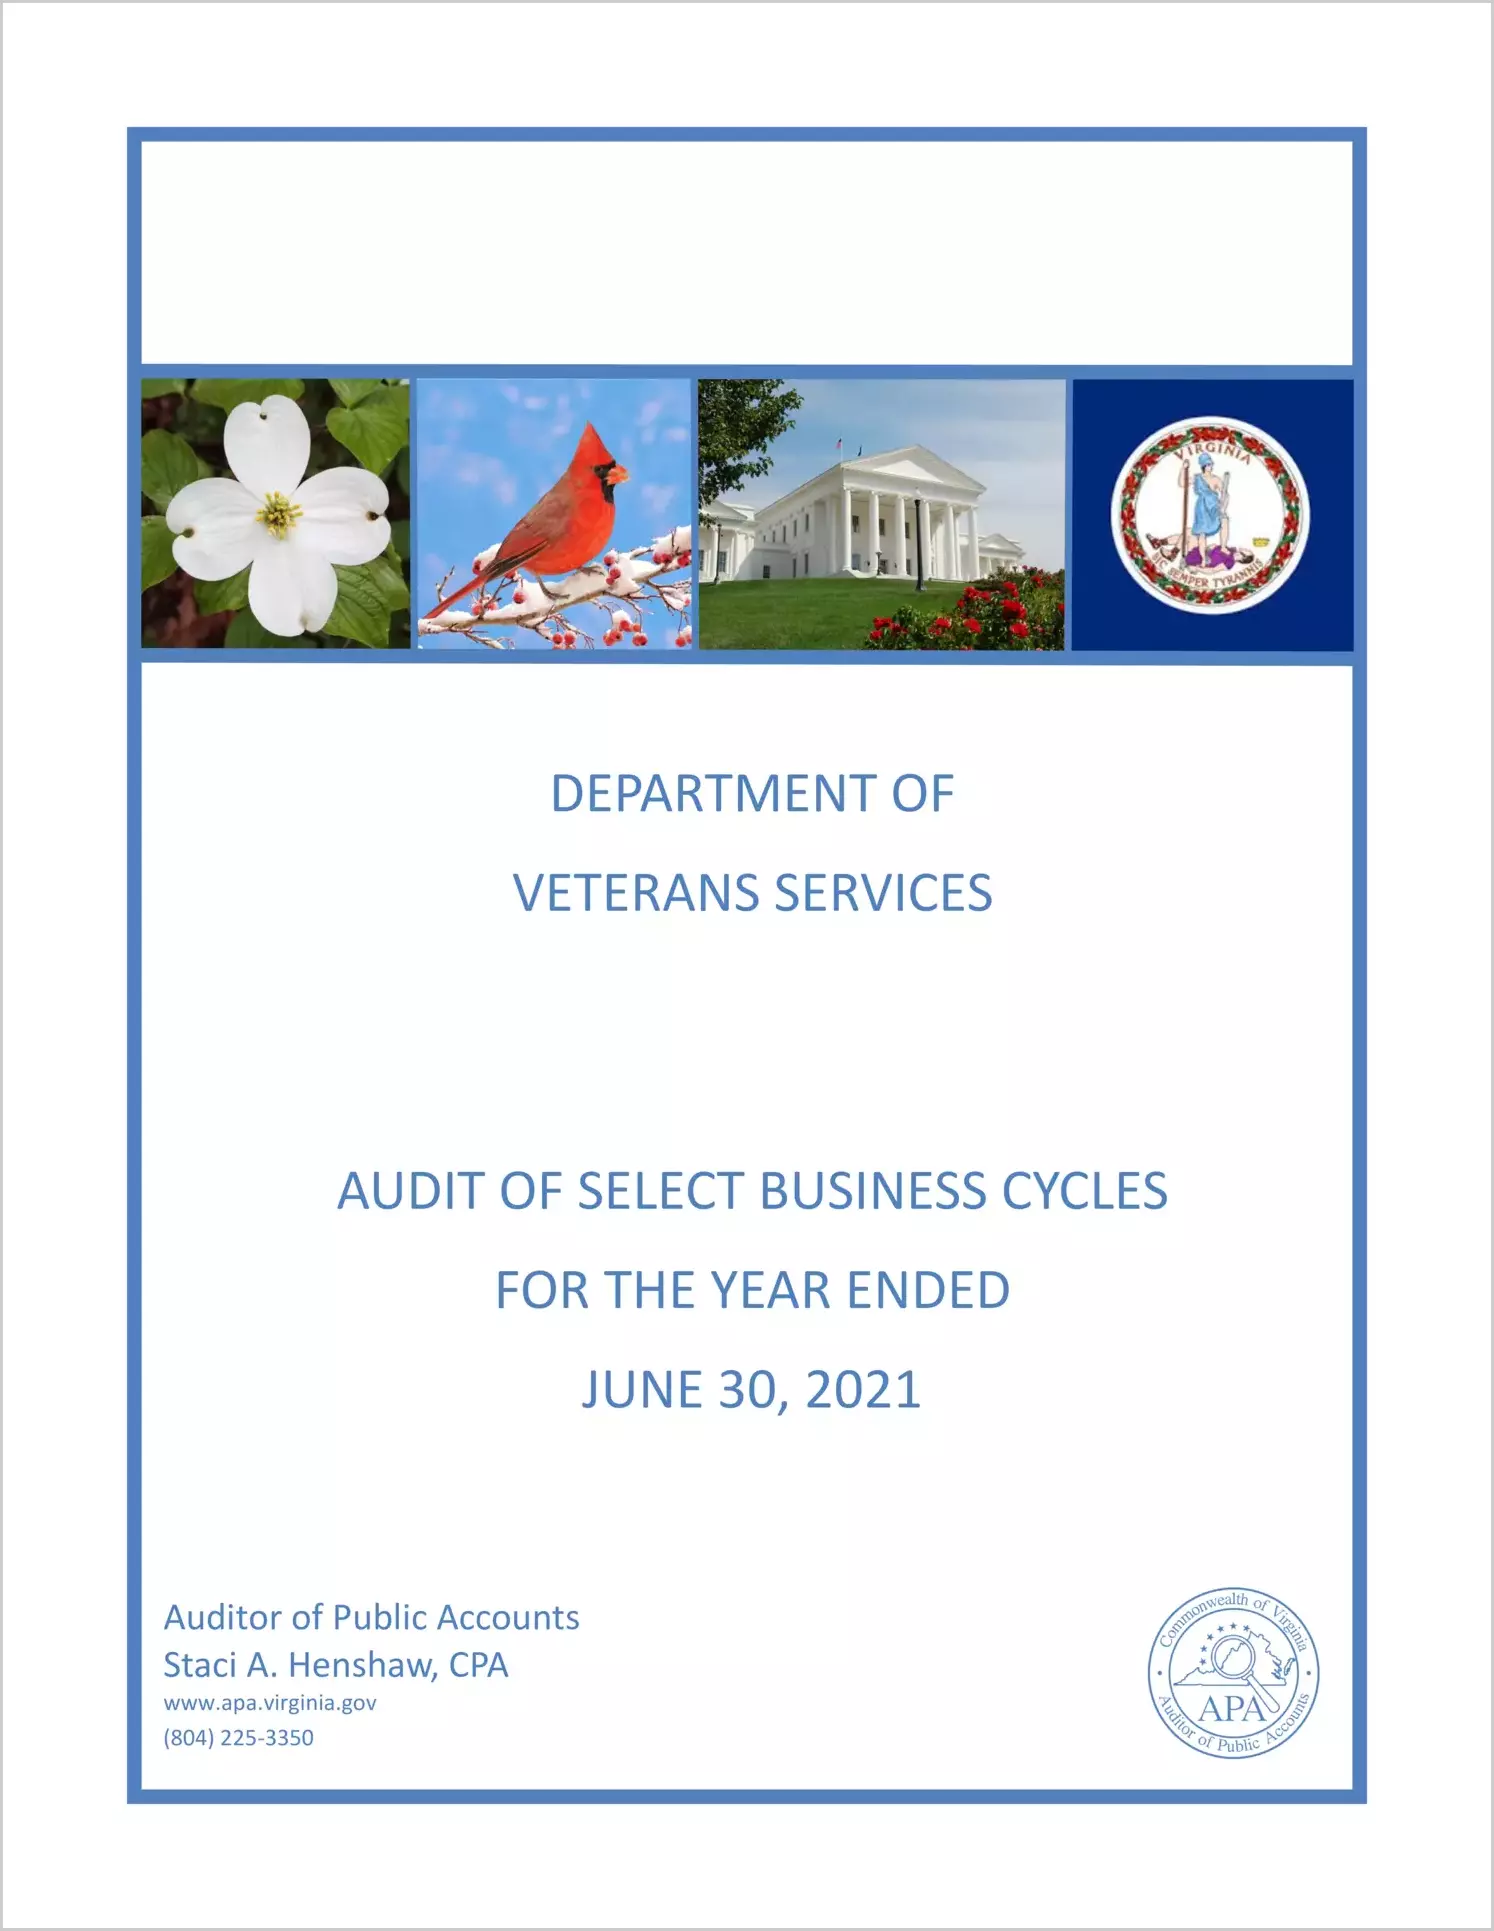 Department of Veterans Services Audit of Select Business Cycles for the year ended June 30, 2021